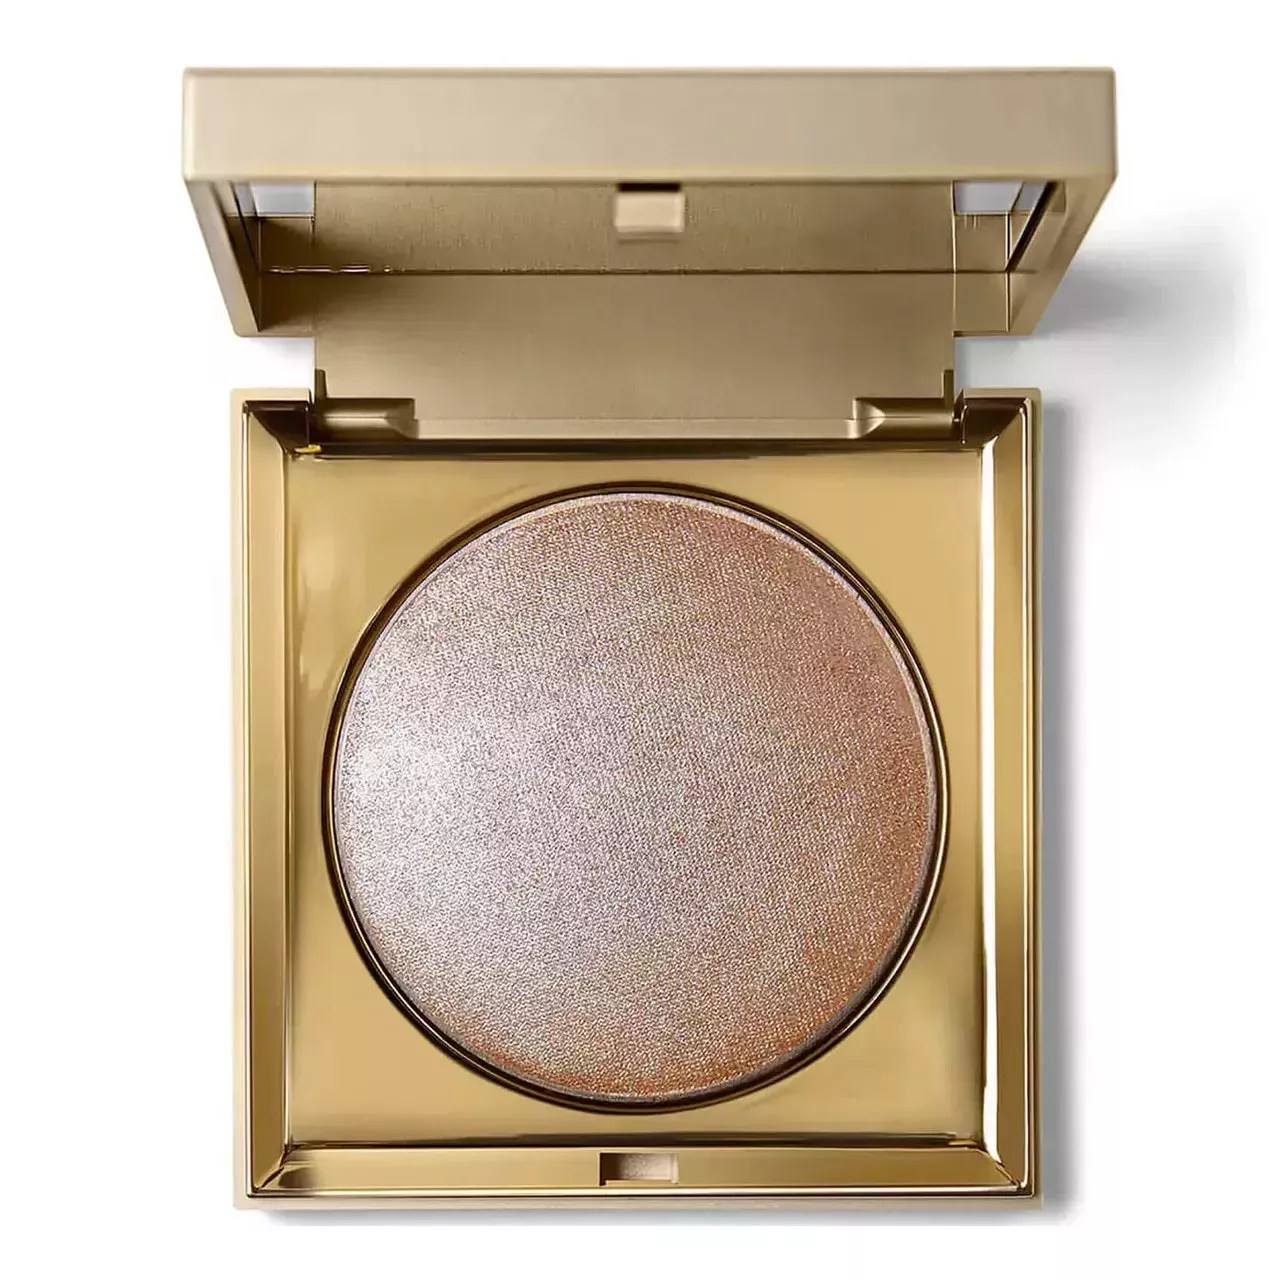 Stila Heaven's Hue Highlighter gold square compact of pale highlighter on white background